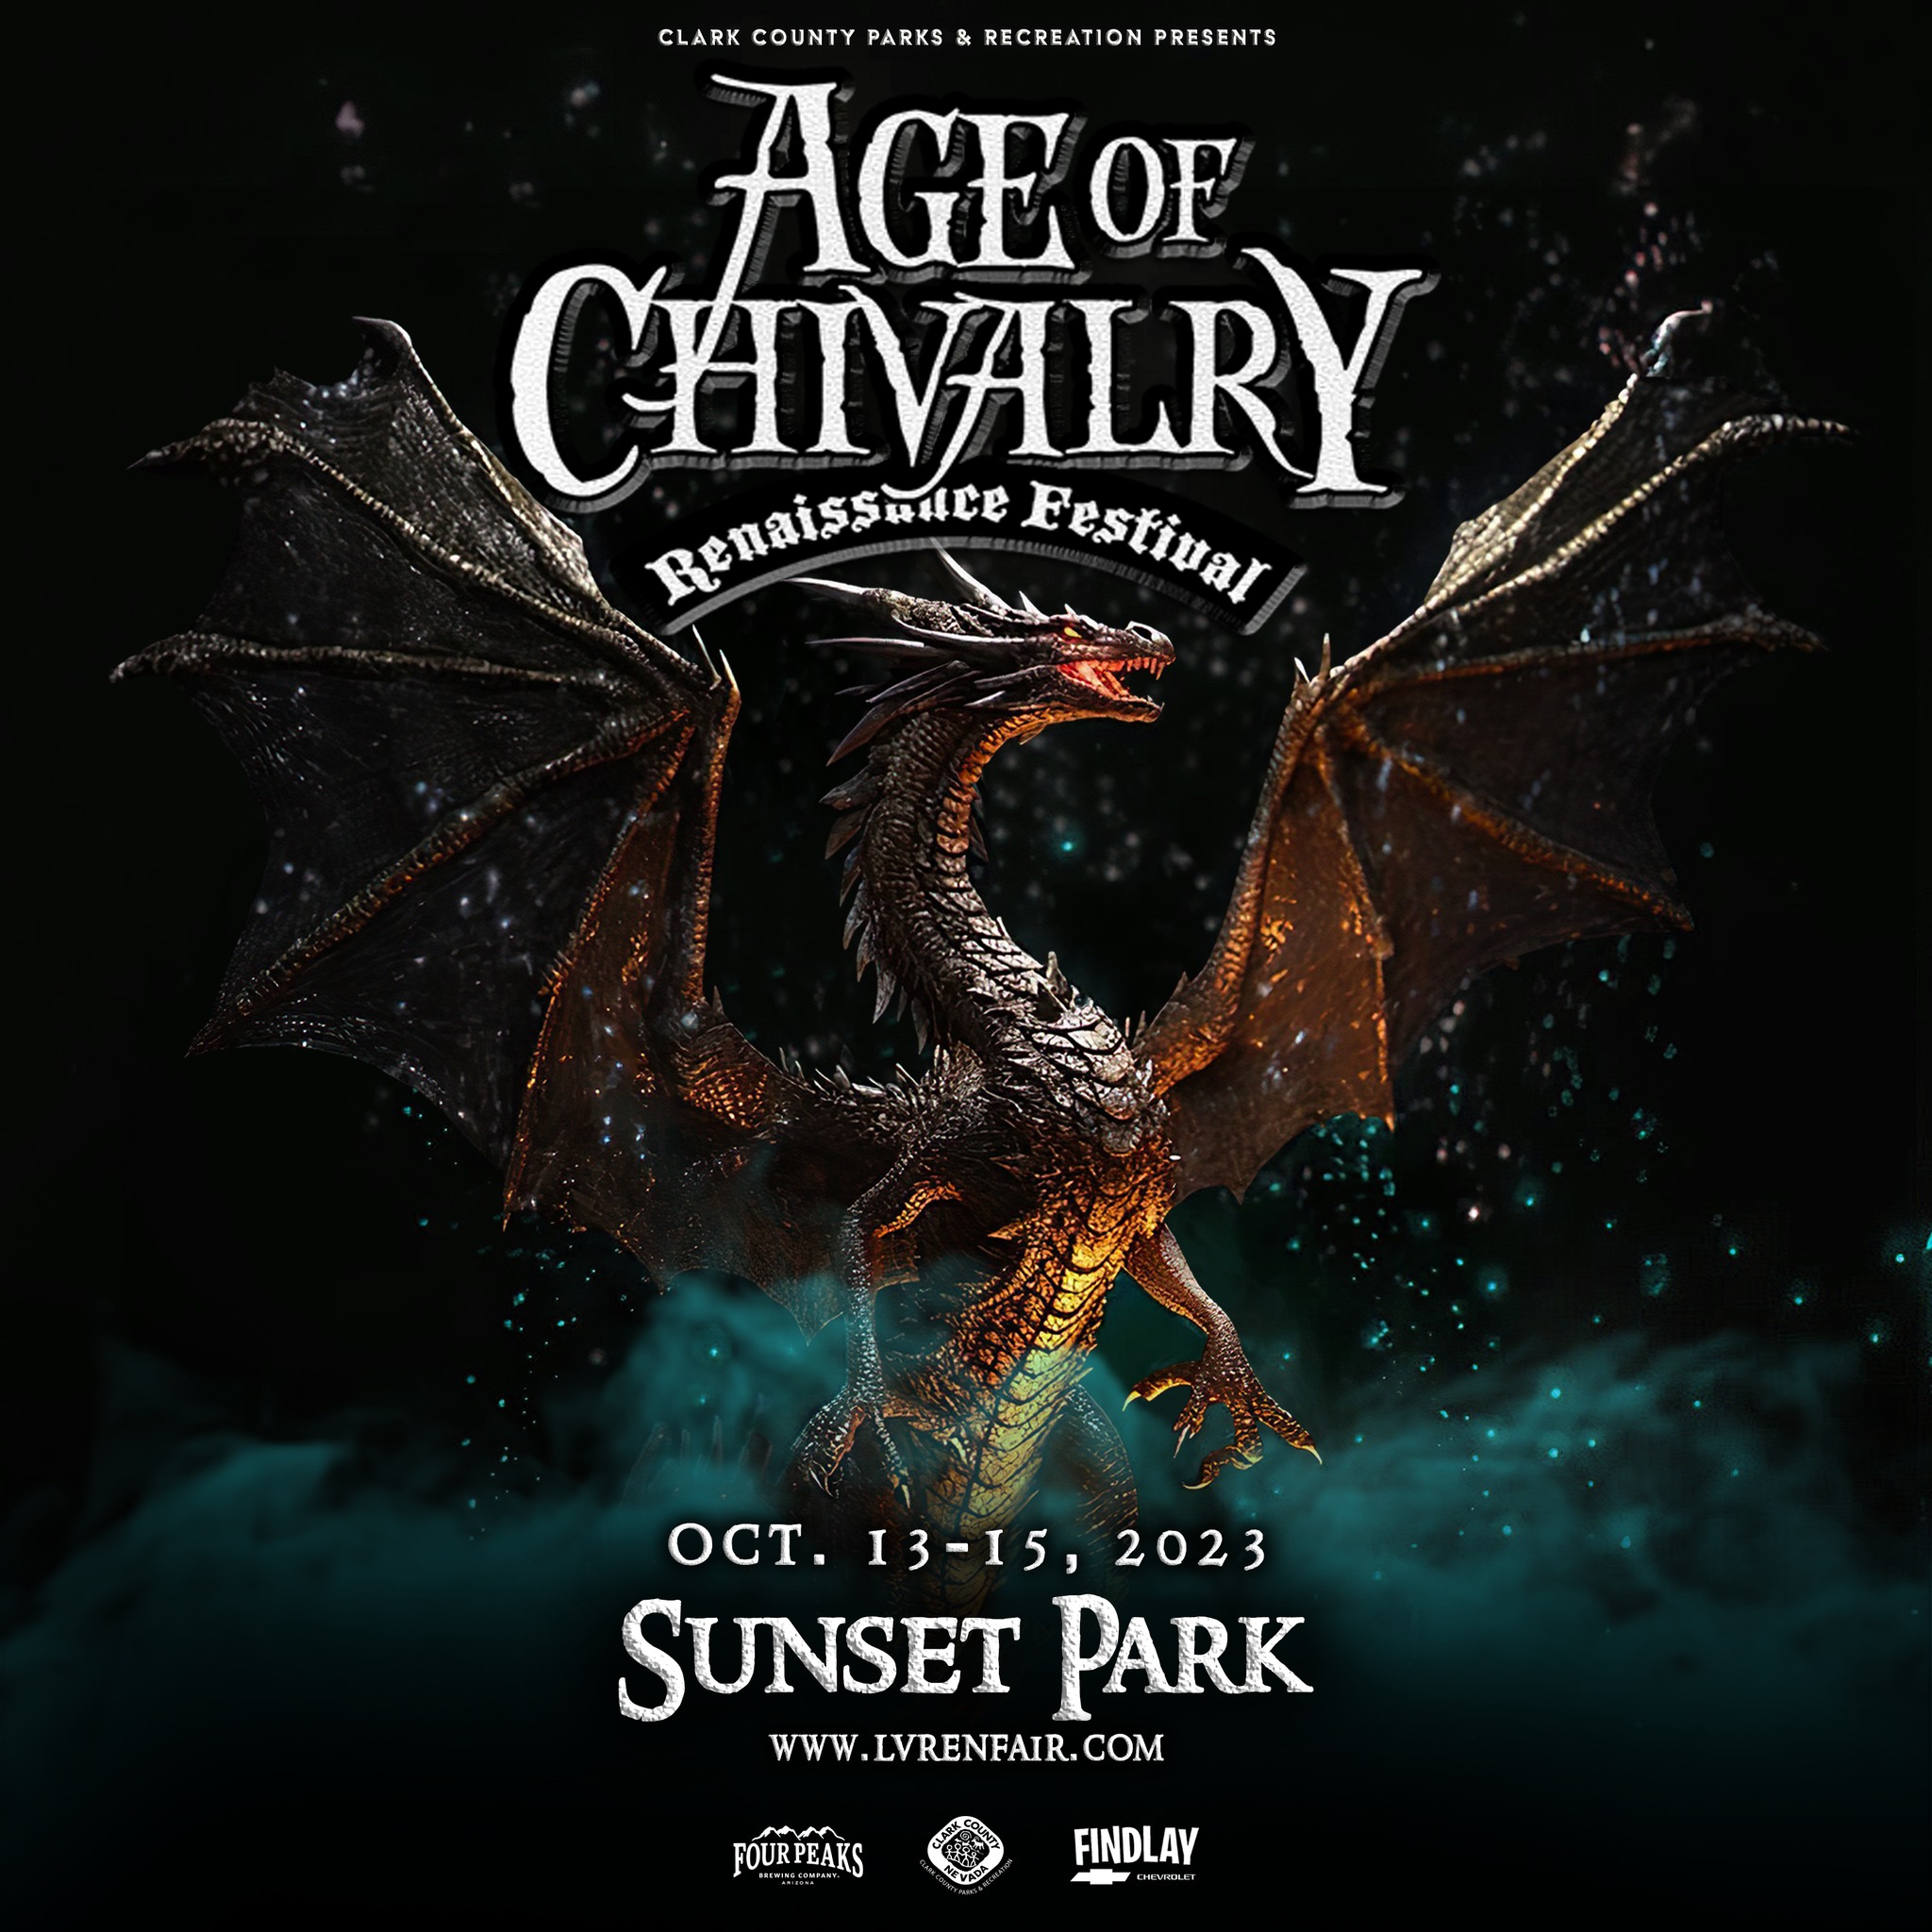 Buy Tickets to Age of Chivalry Renaissance Festival in Las Vegas on